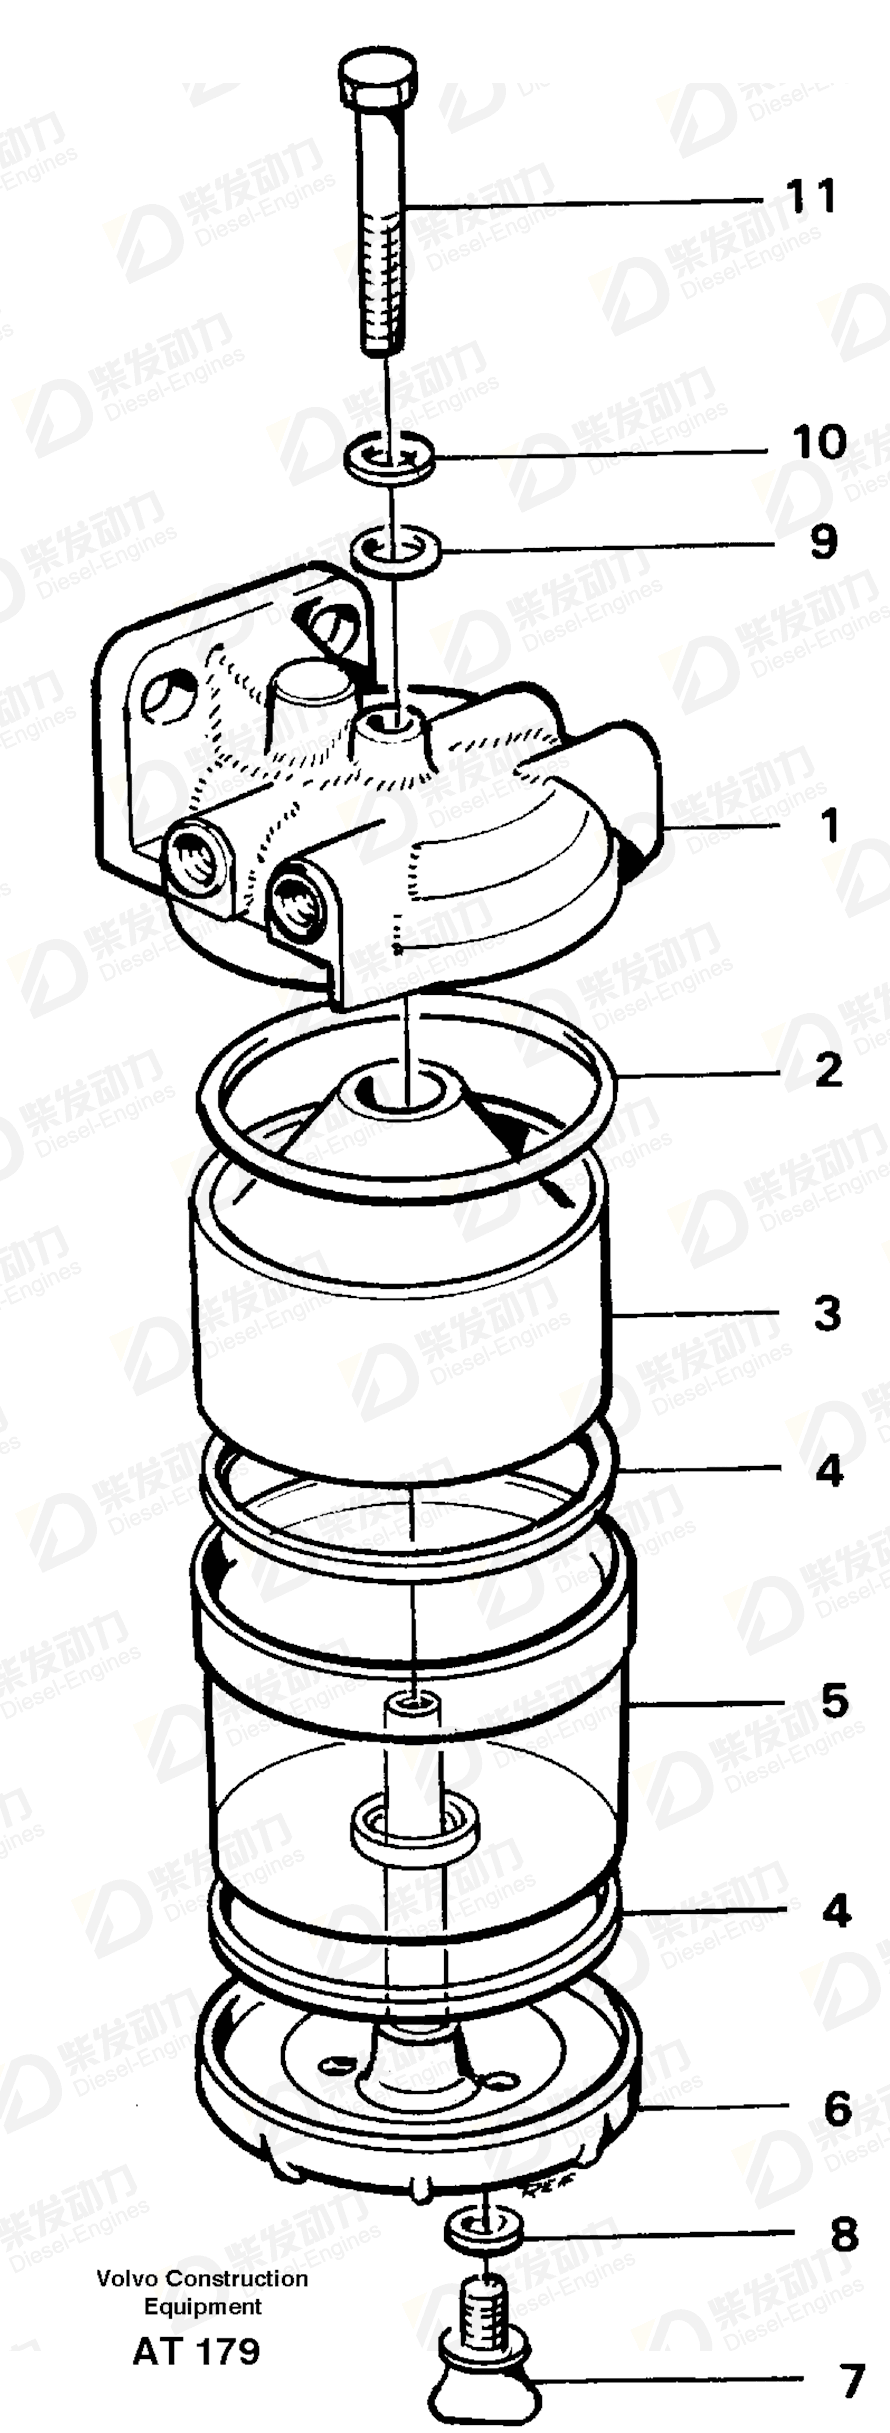 VOLVO Base plate 6213506 Drawing